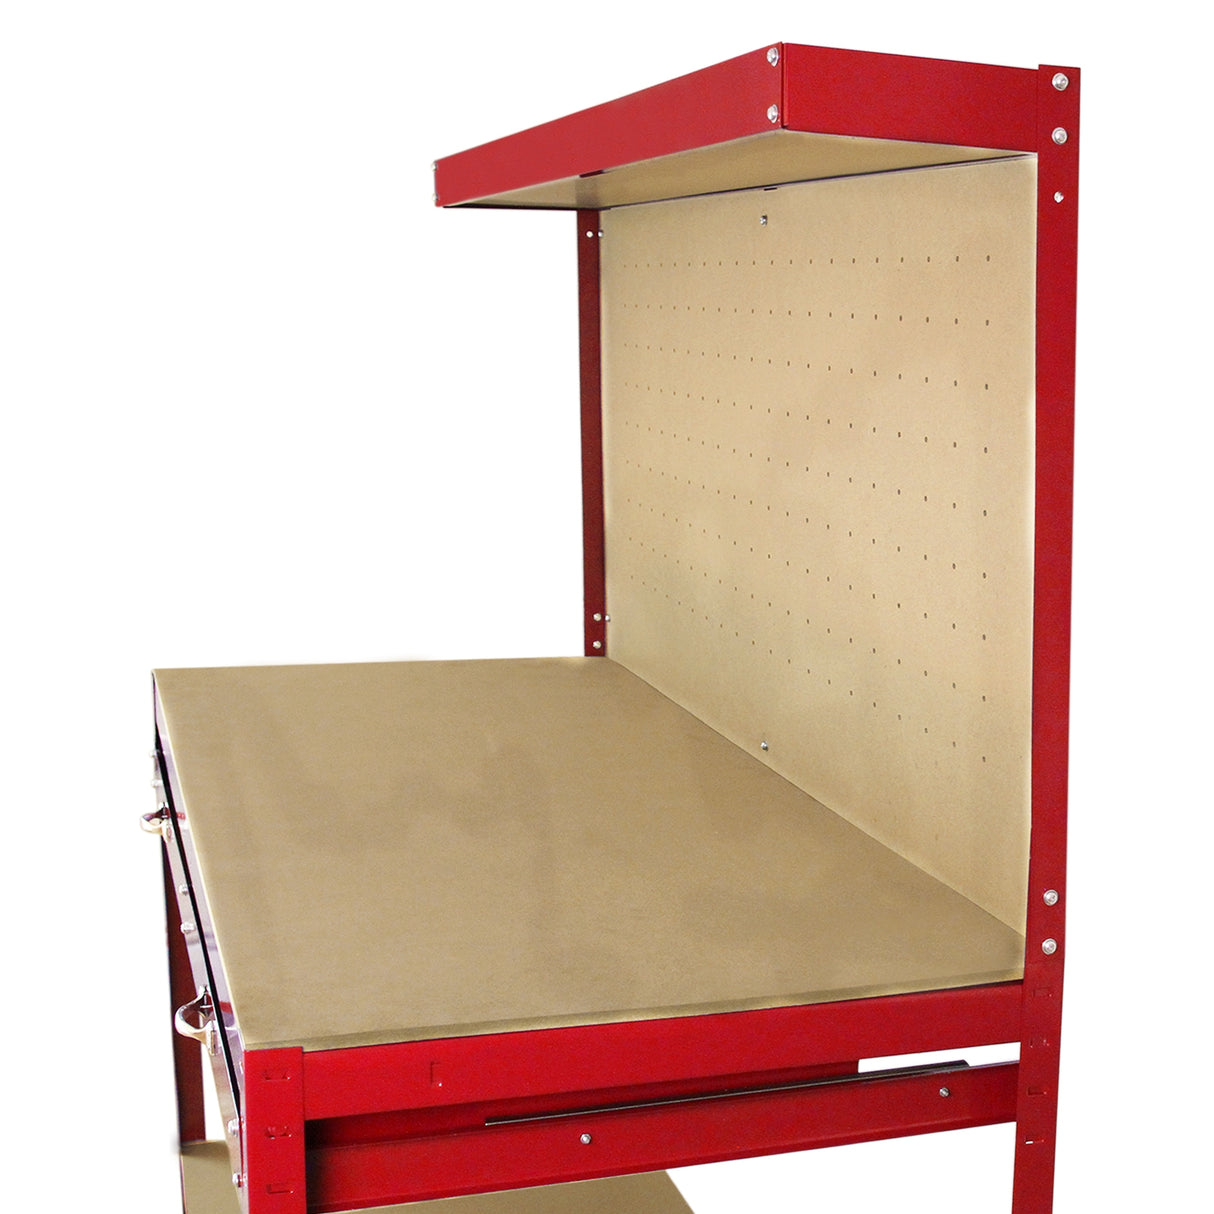 Workbench With Pegboard And Drawer In Red